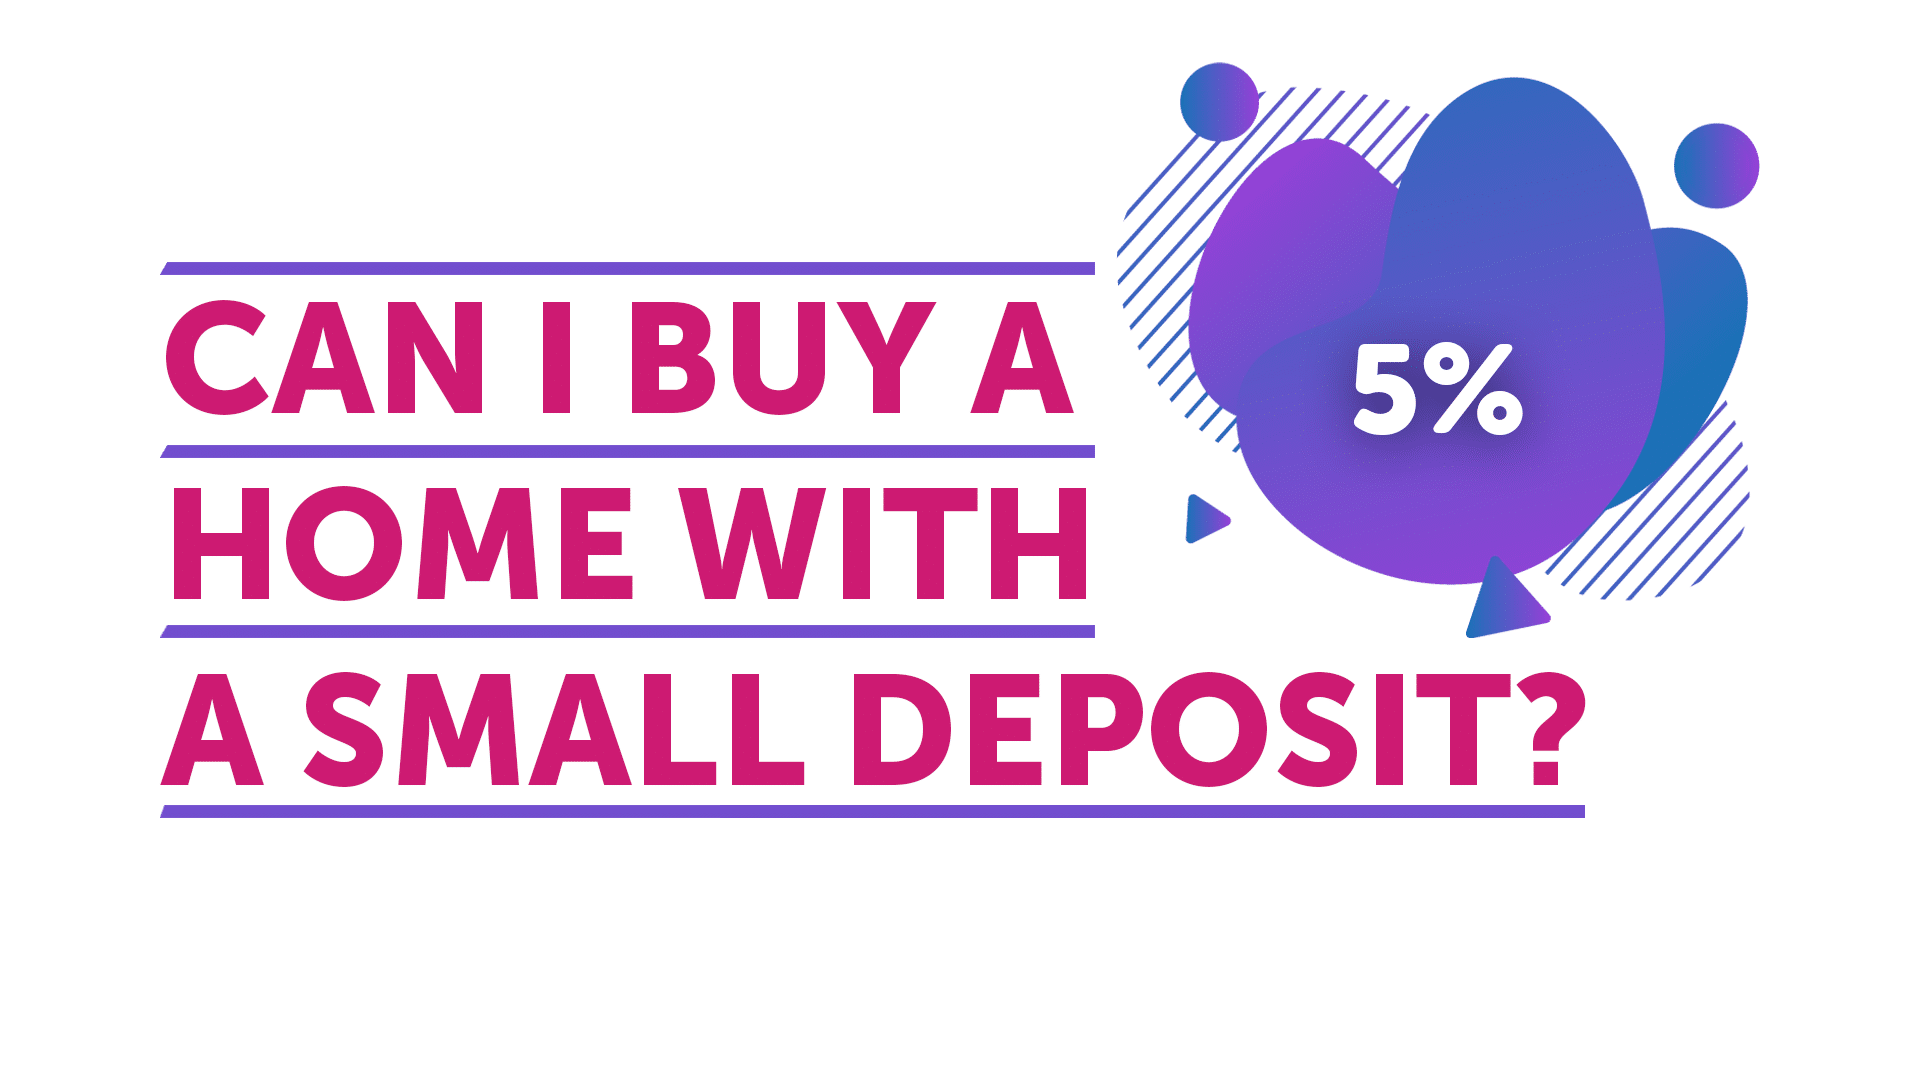 Can I Buy a Home With a 5% Deposit in Hull?